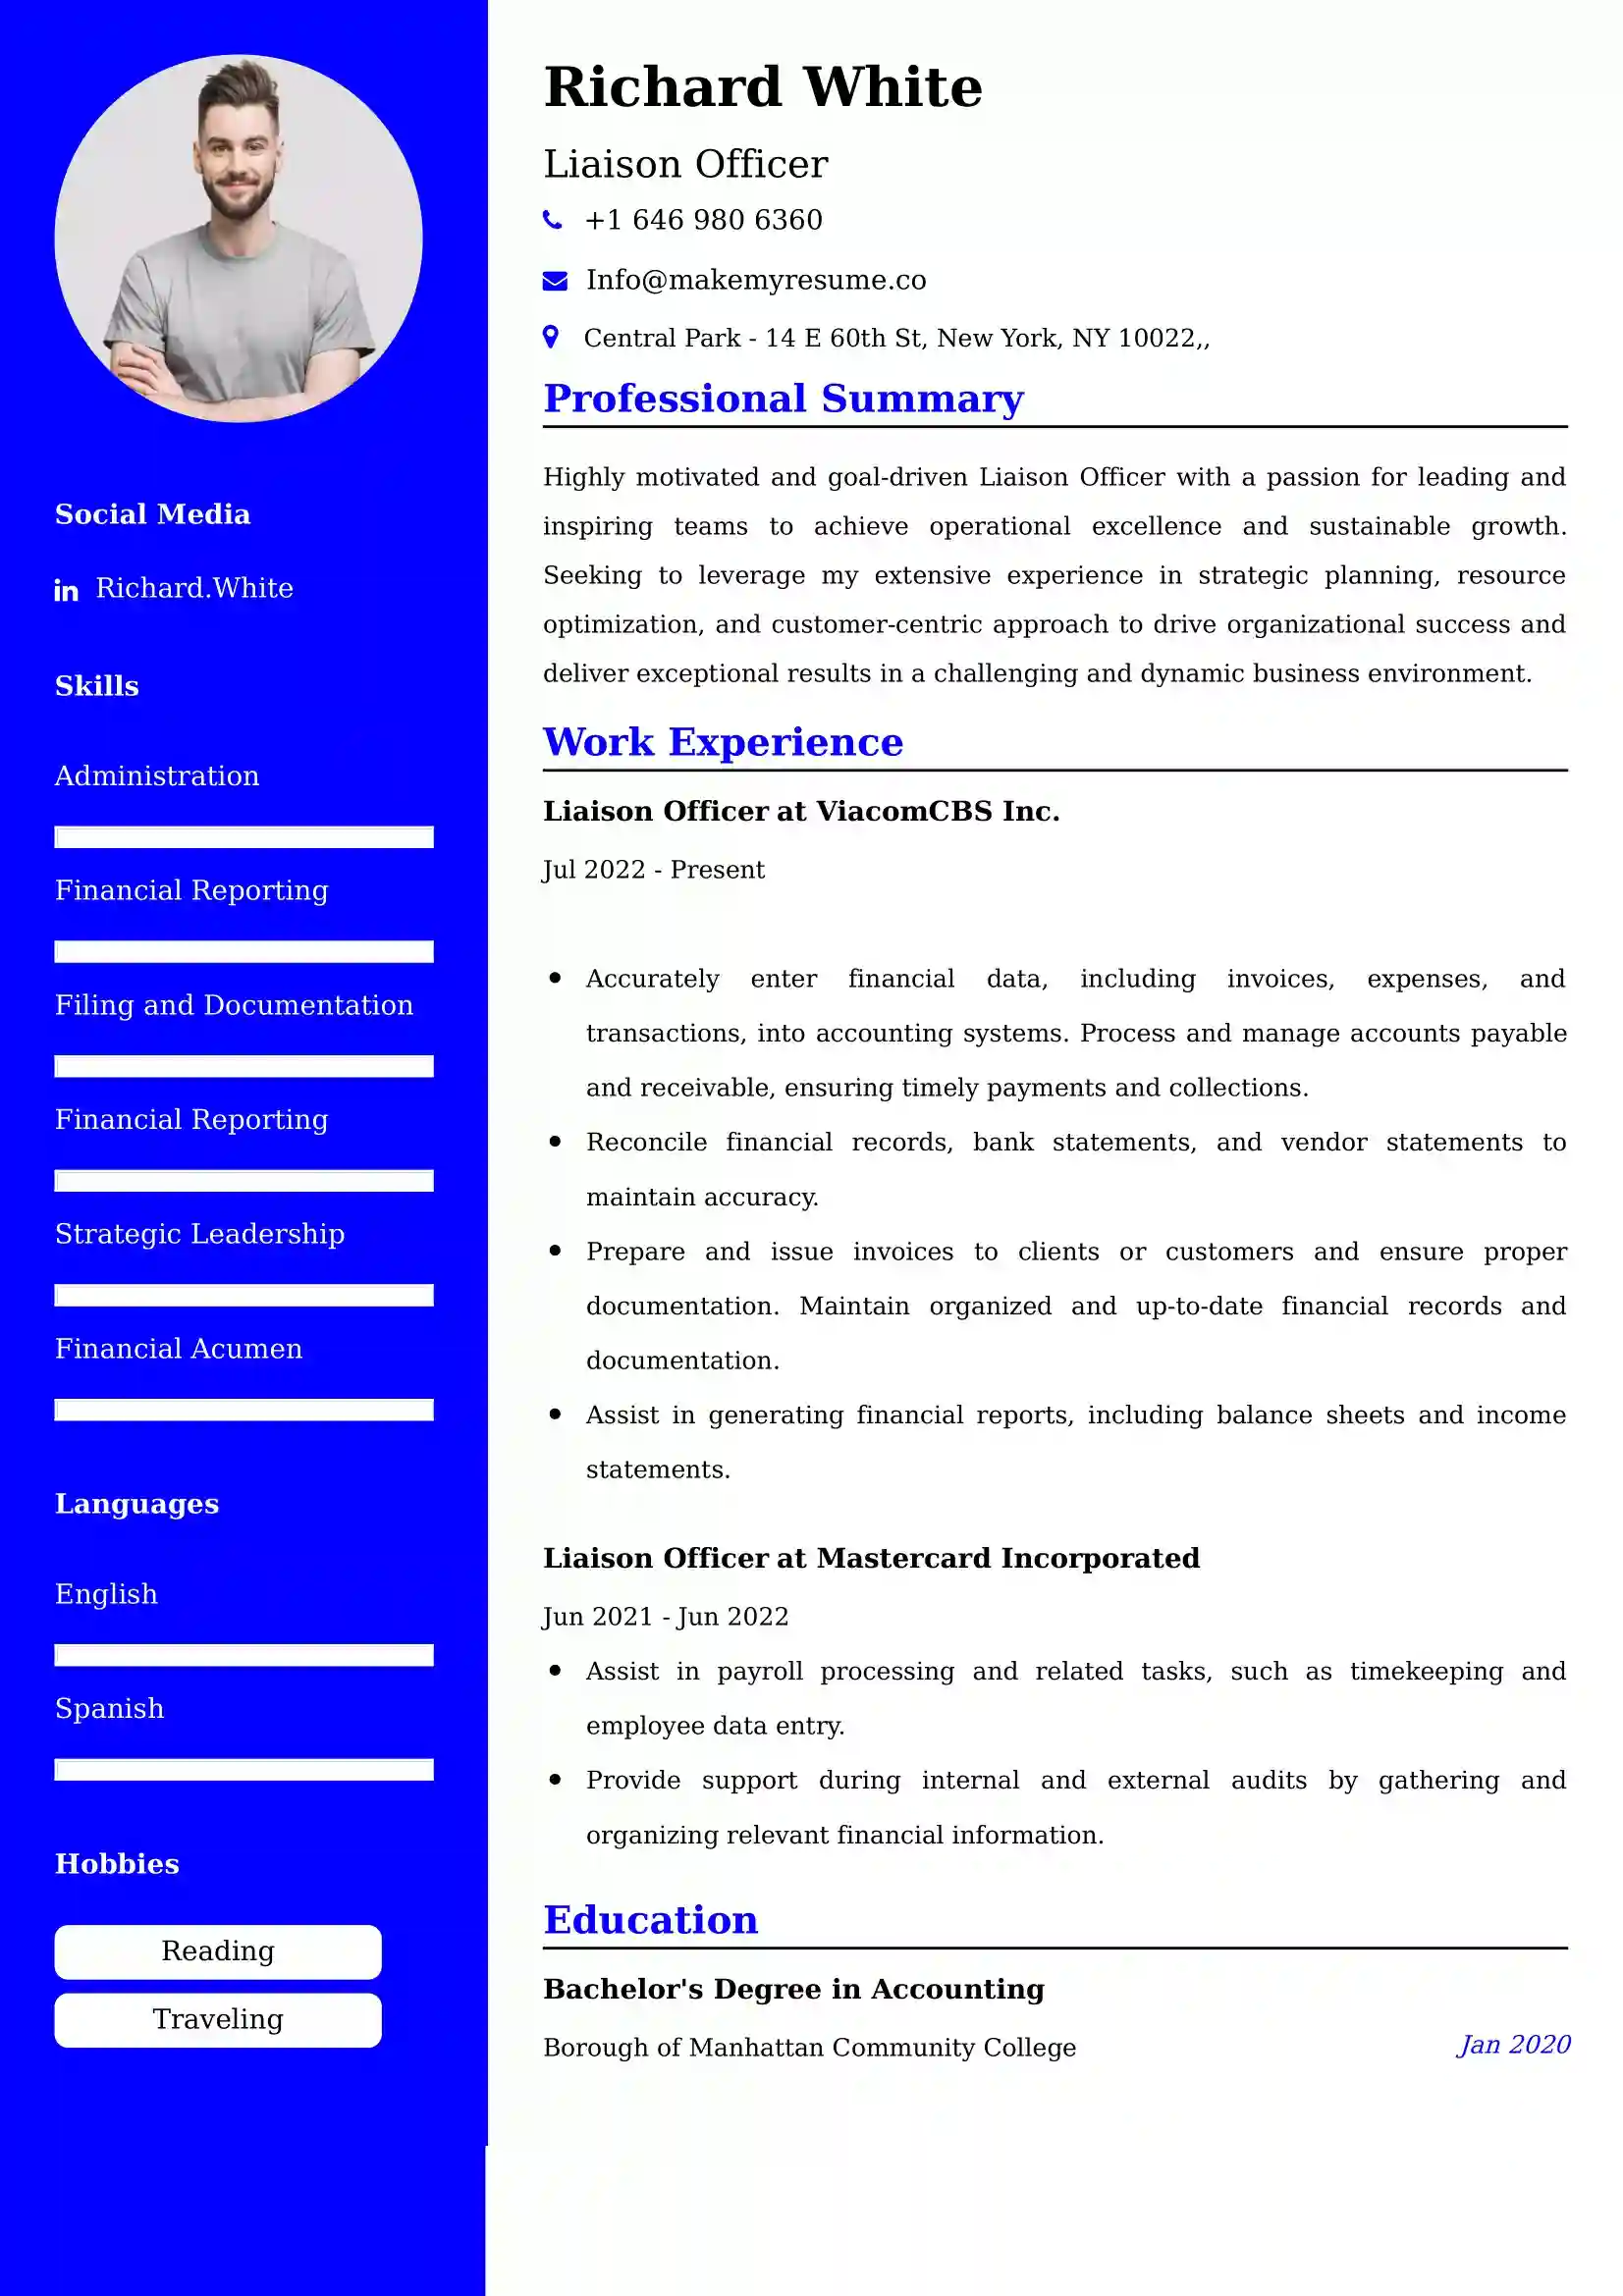 Liaison Officer Resume Examples - UK Format, Latest Template.